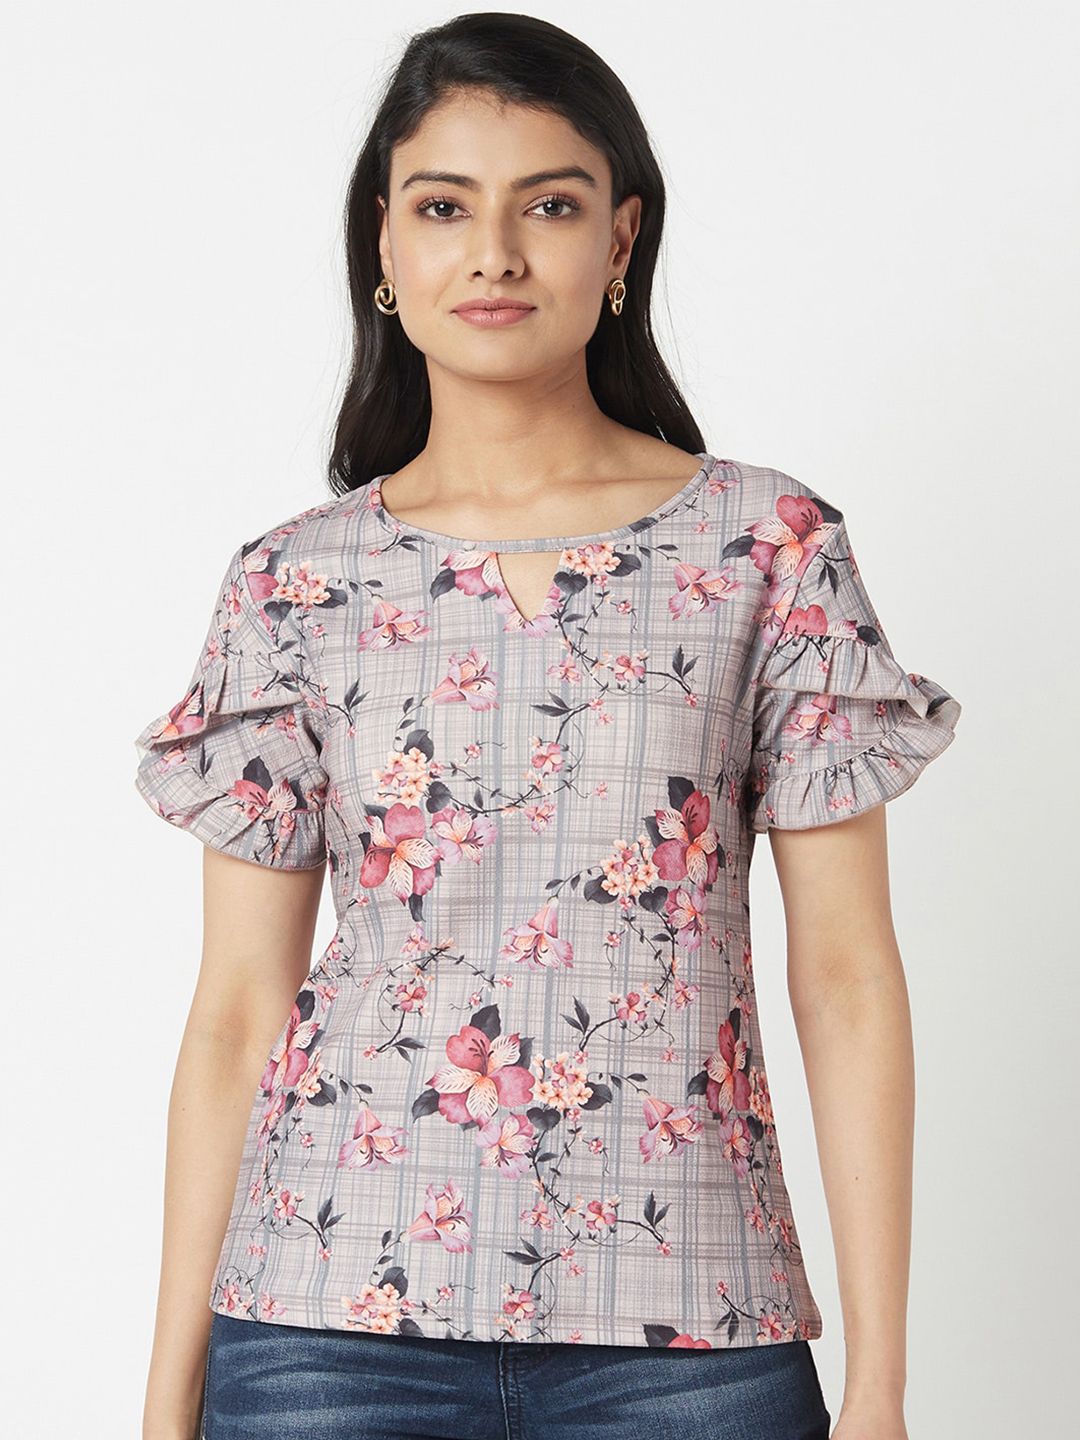 Miss Grace Floral Printed Keyhole Neck Bell Sleeve Top Price in India